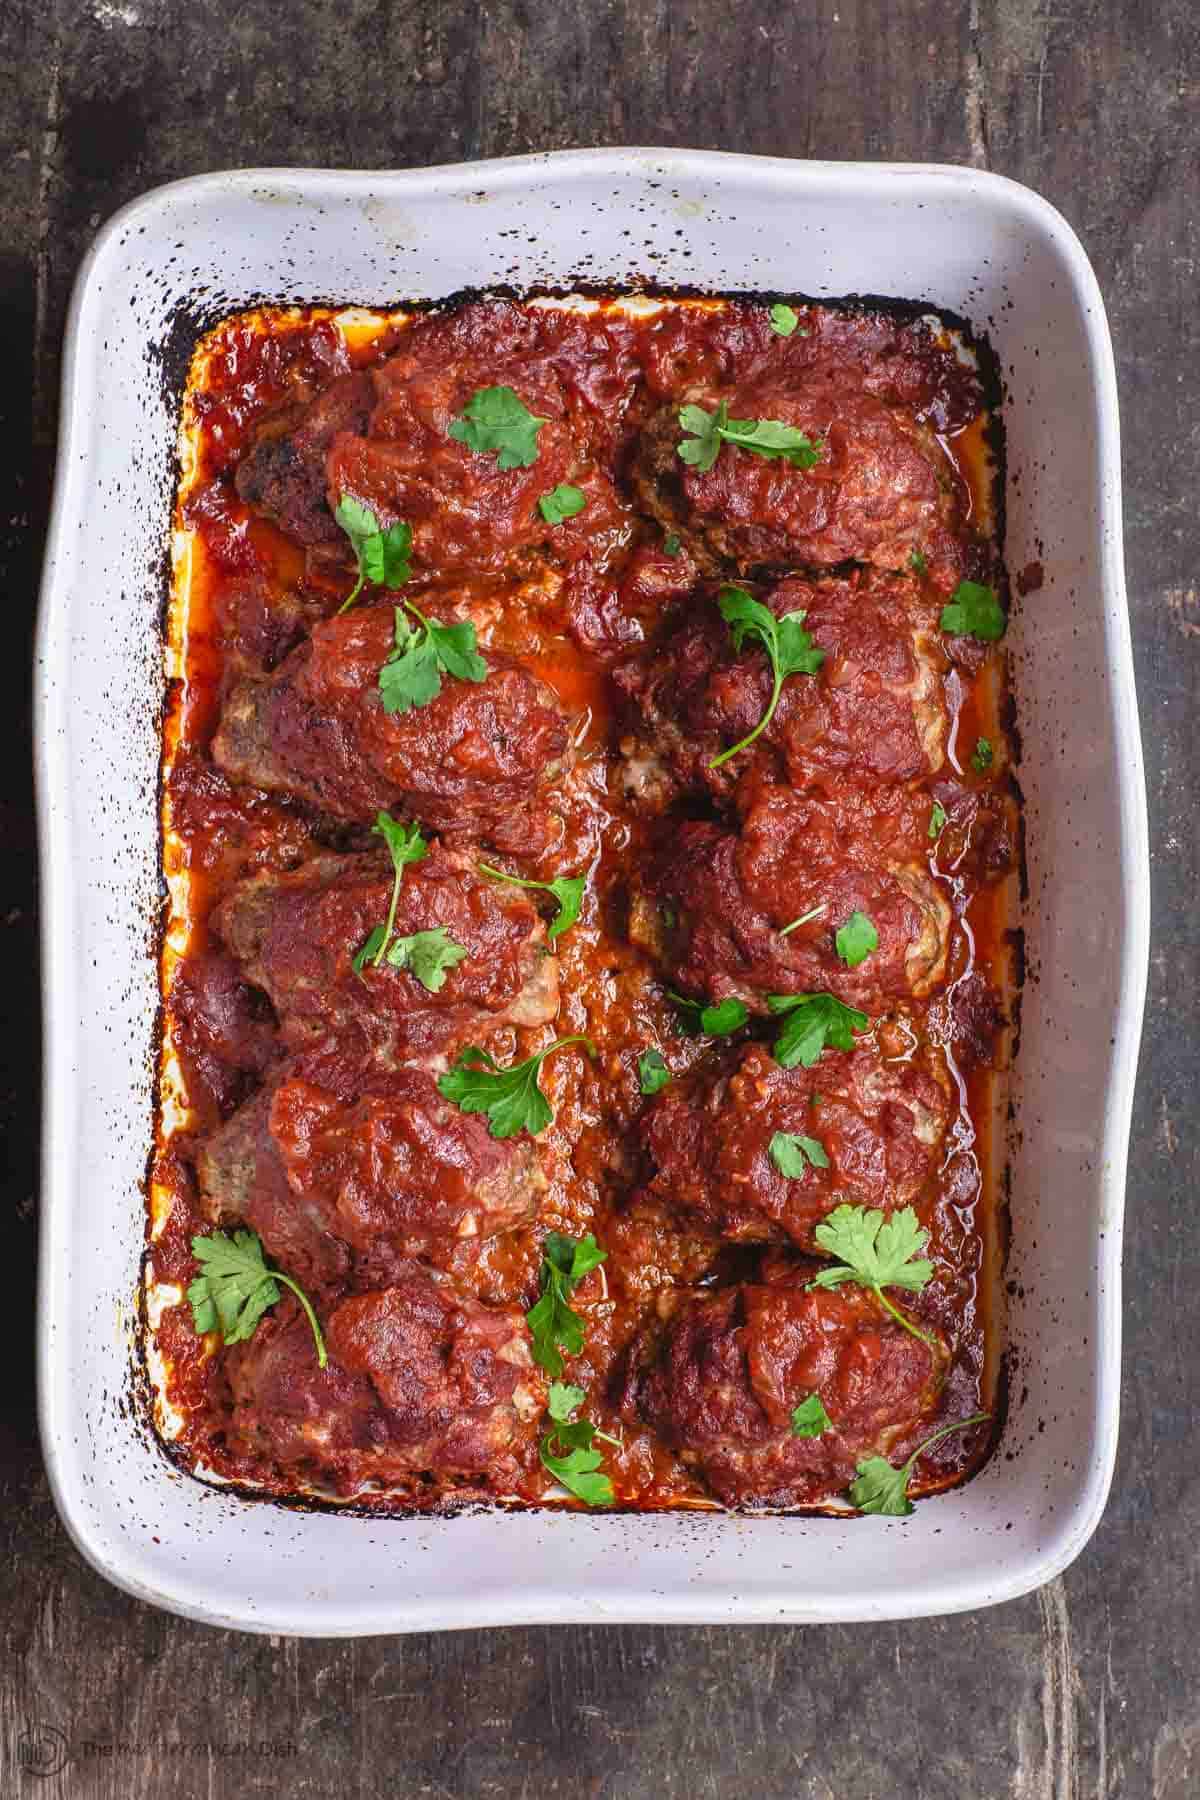 Greek Baked Meatballs with Red Sauce. Garnished with Parsley